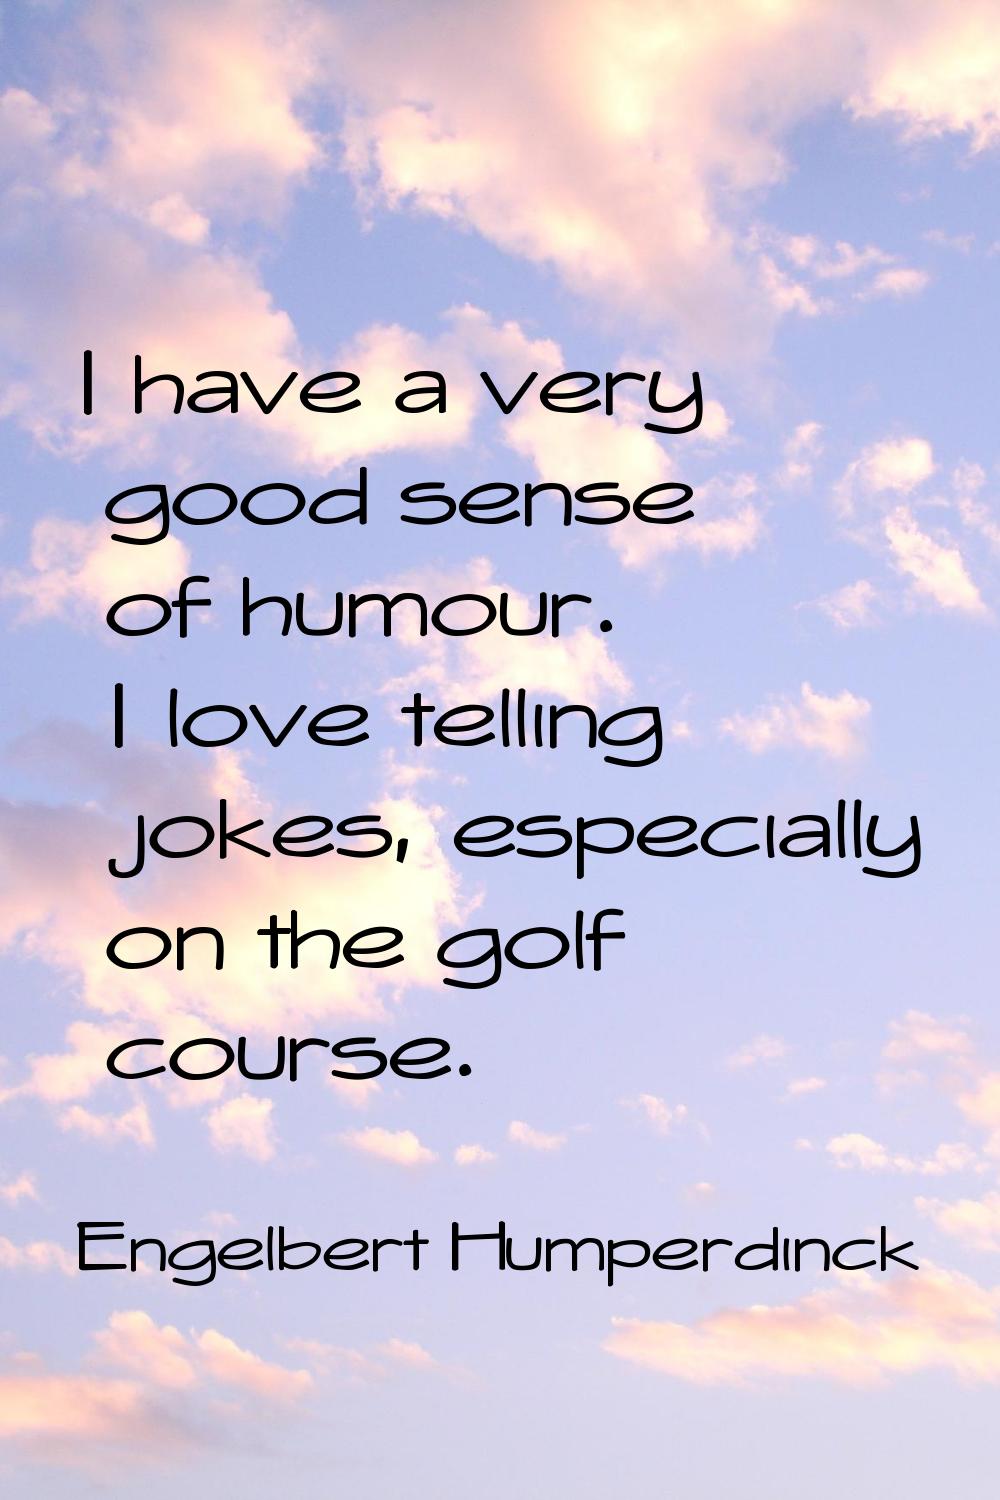 I have a very good sense of humour. I love telling jokes, especially on the golf course.